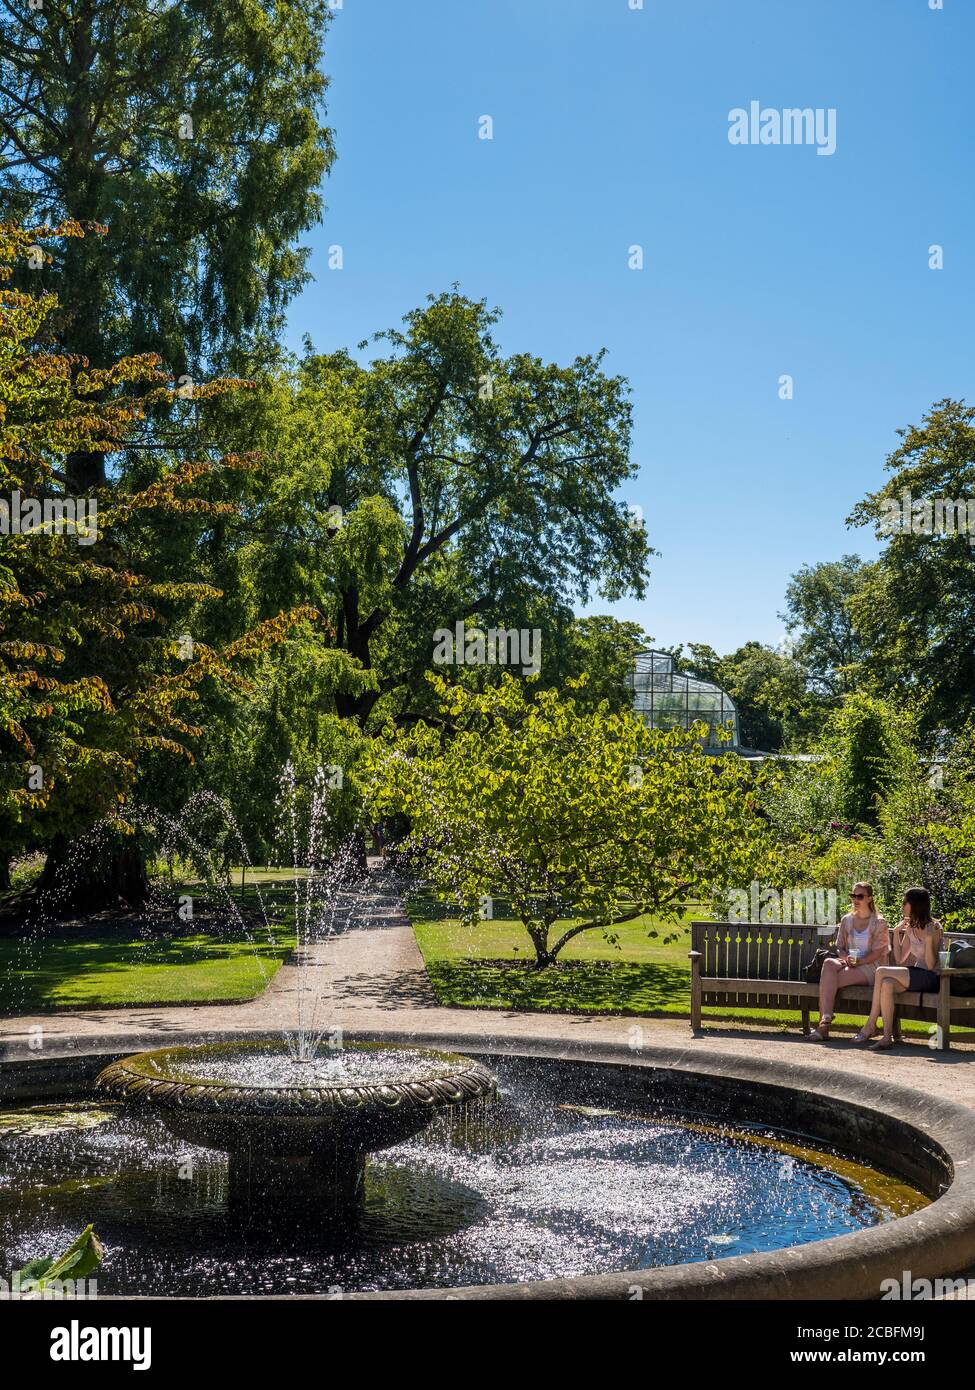 Two Young Woman Sitting Next to Pool with Fountain, University of Oxford Botanical Gardens, Oxford, Oxfordshire, England, UK, GB. Stock Photo